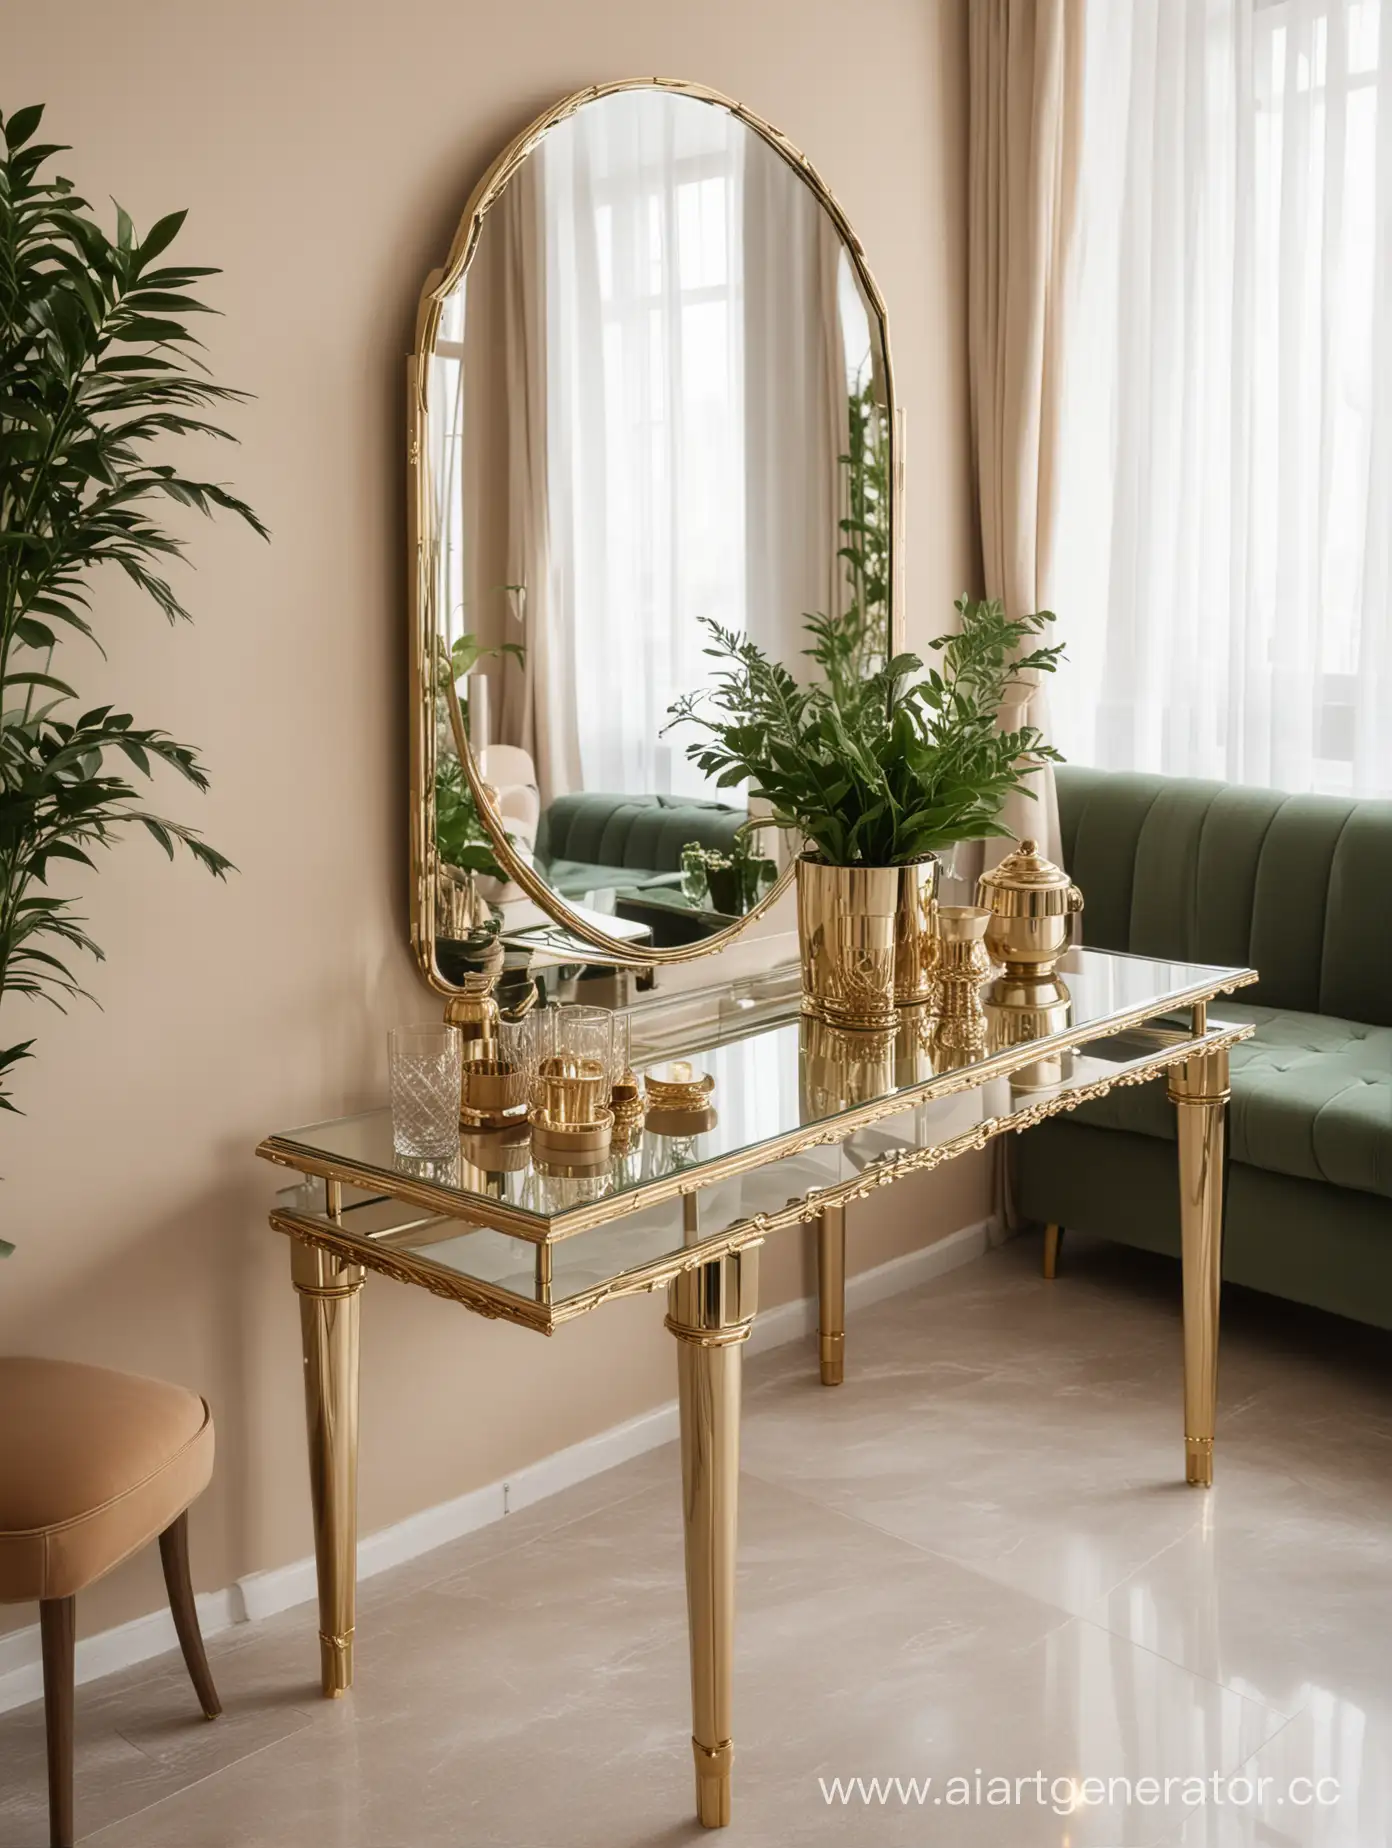 Elegant-Glass-Mirror-Table-with-Gold-Accents-in-a-Sophisticated-Restaurant-Setting